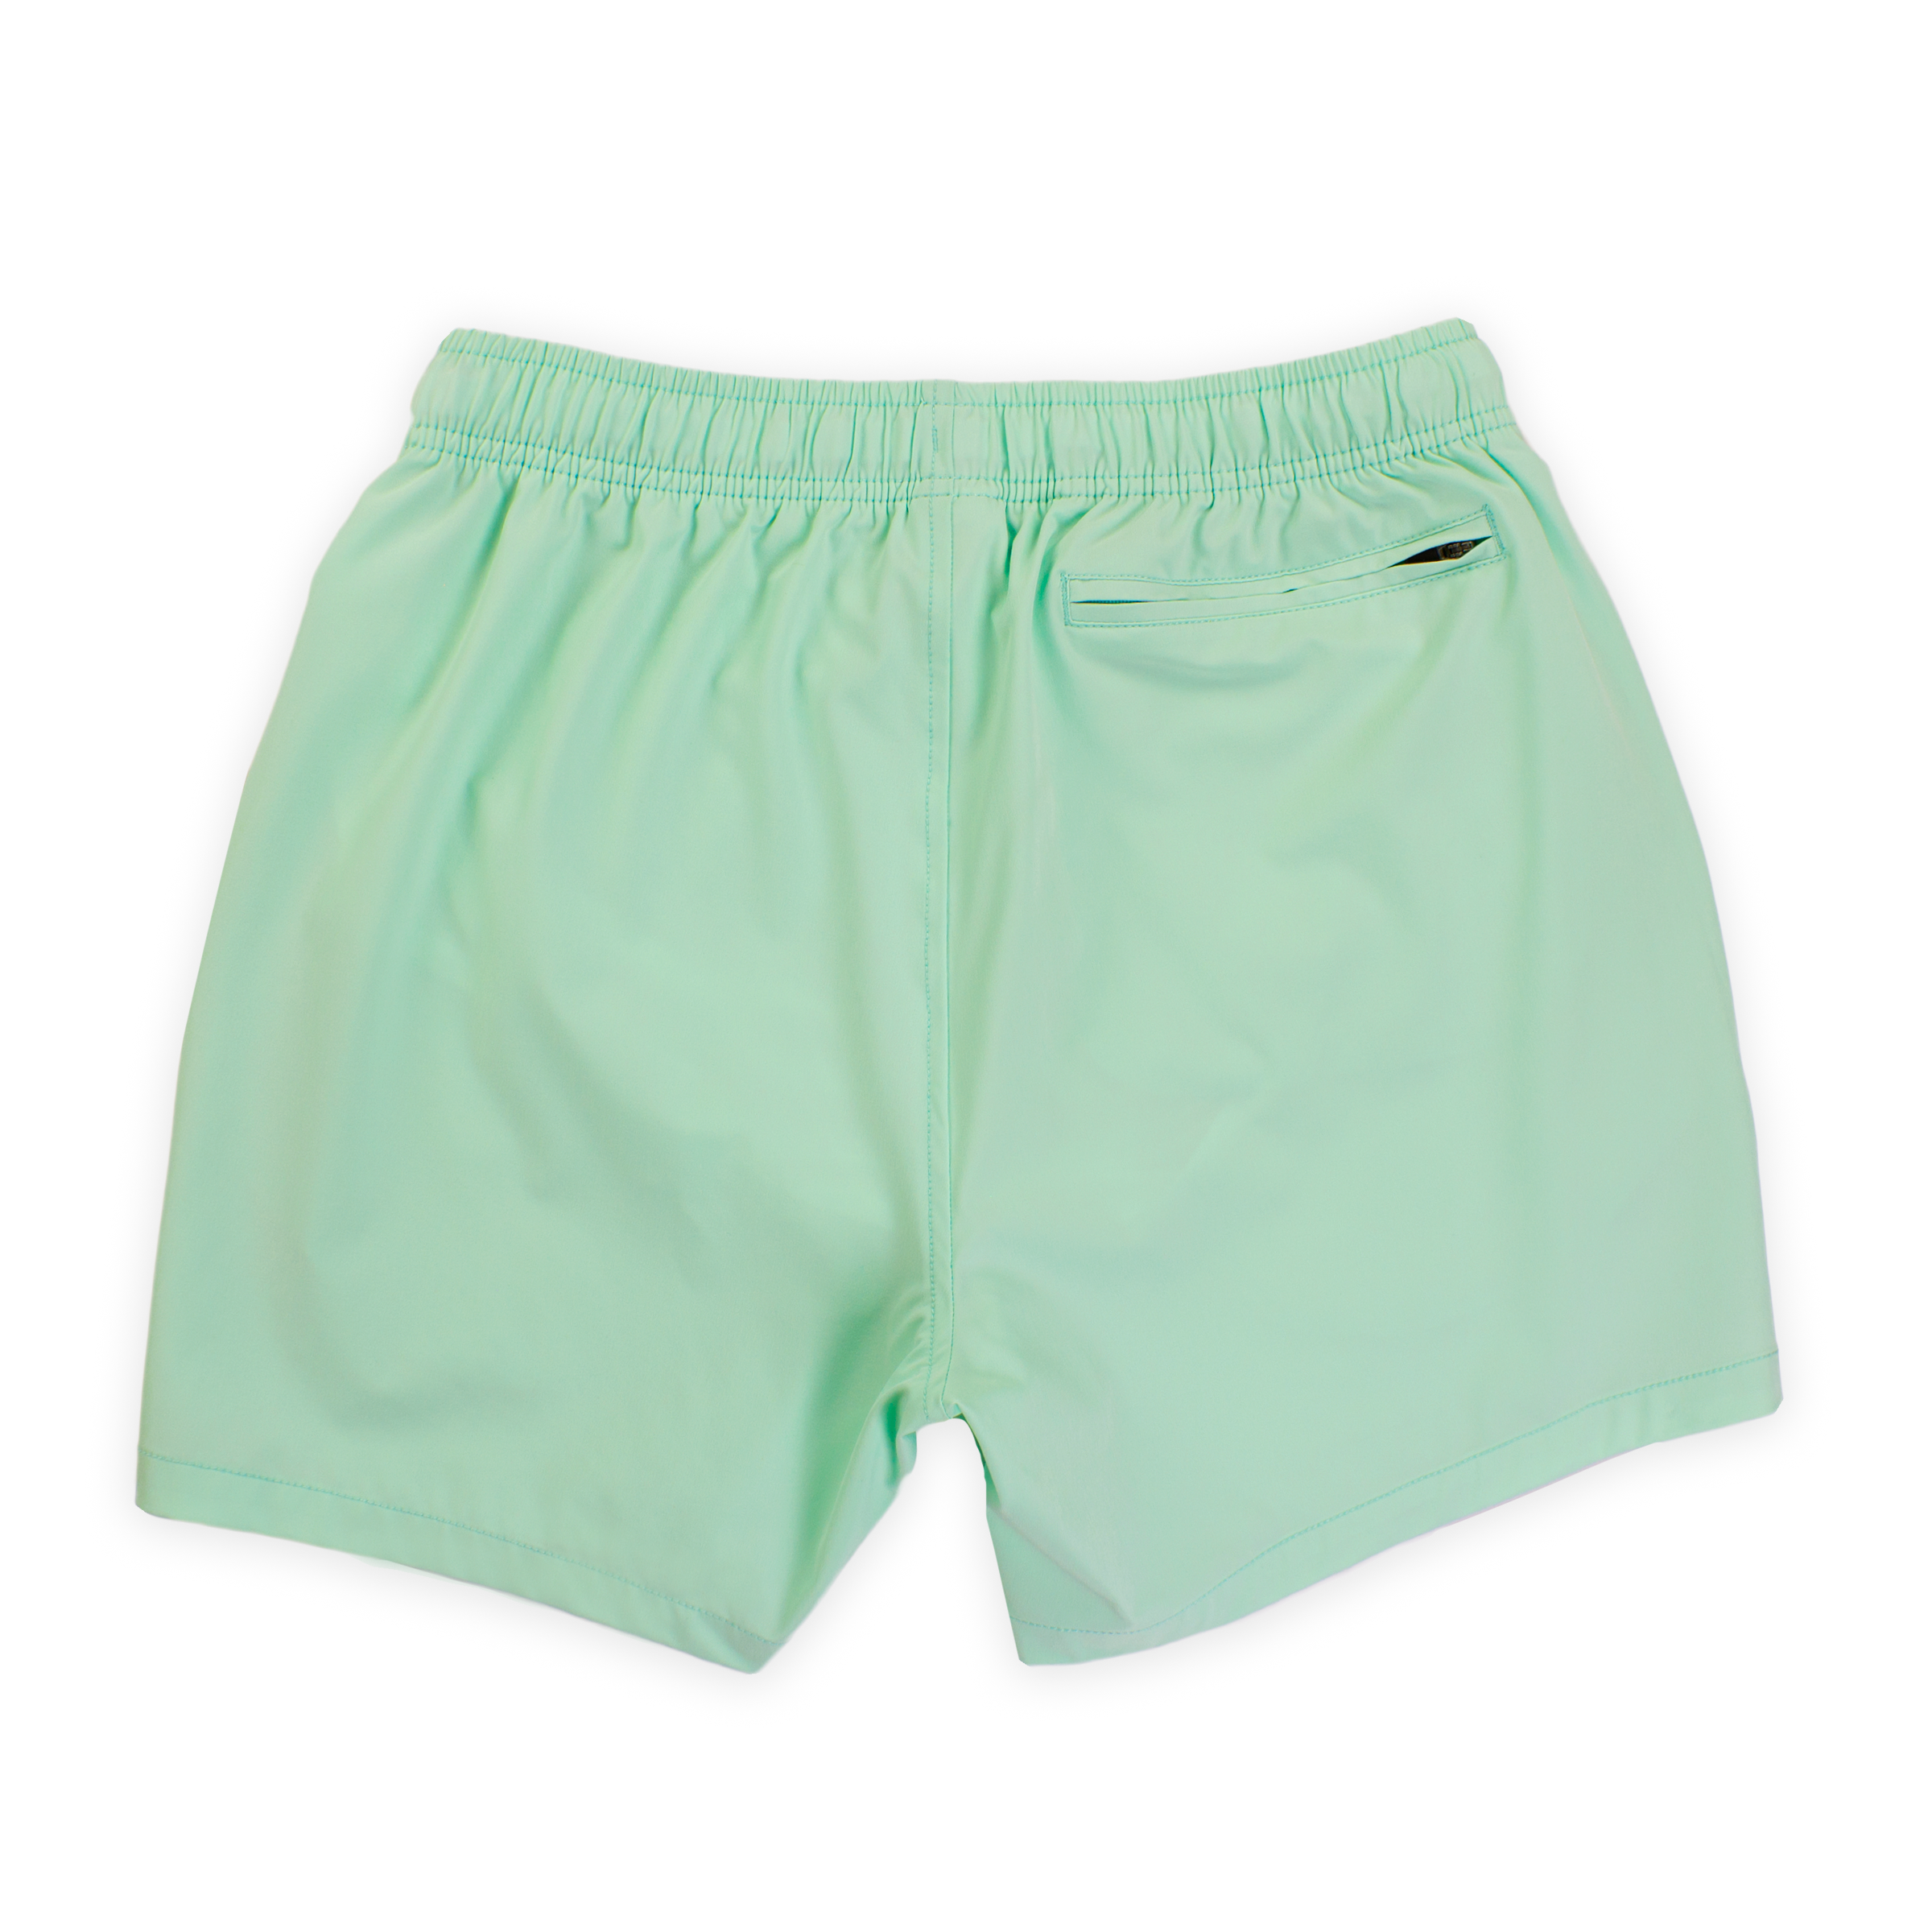 Stretch Swim 5.5" in Mint back with elastic waistband and back right zippered pocket